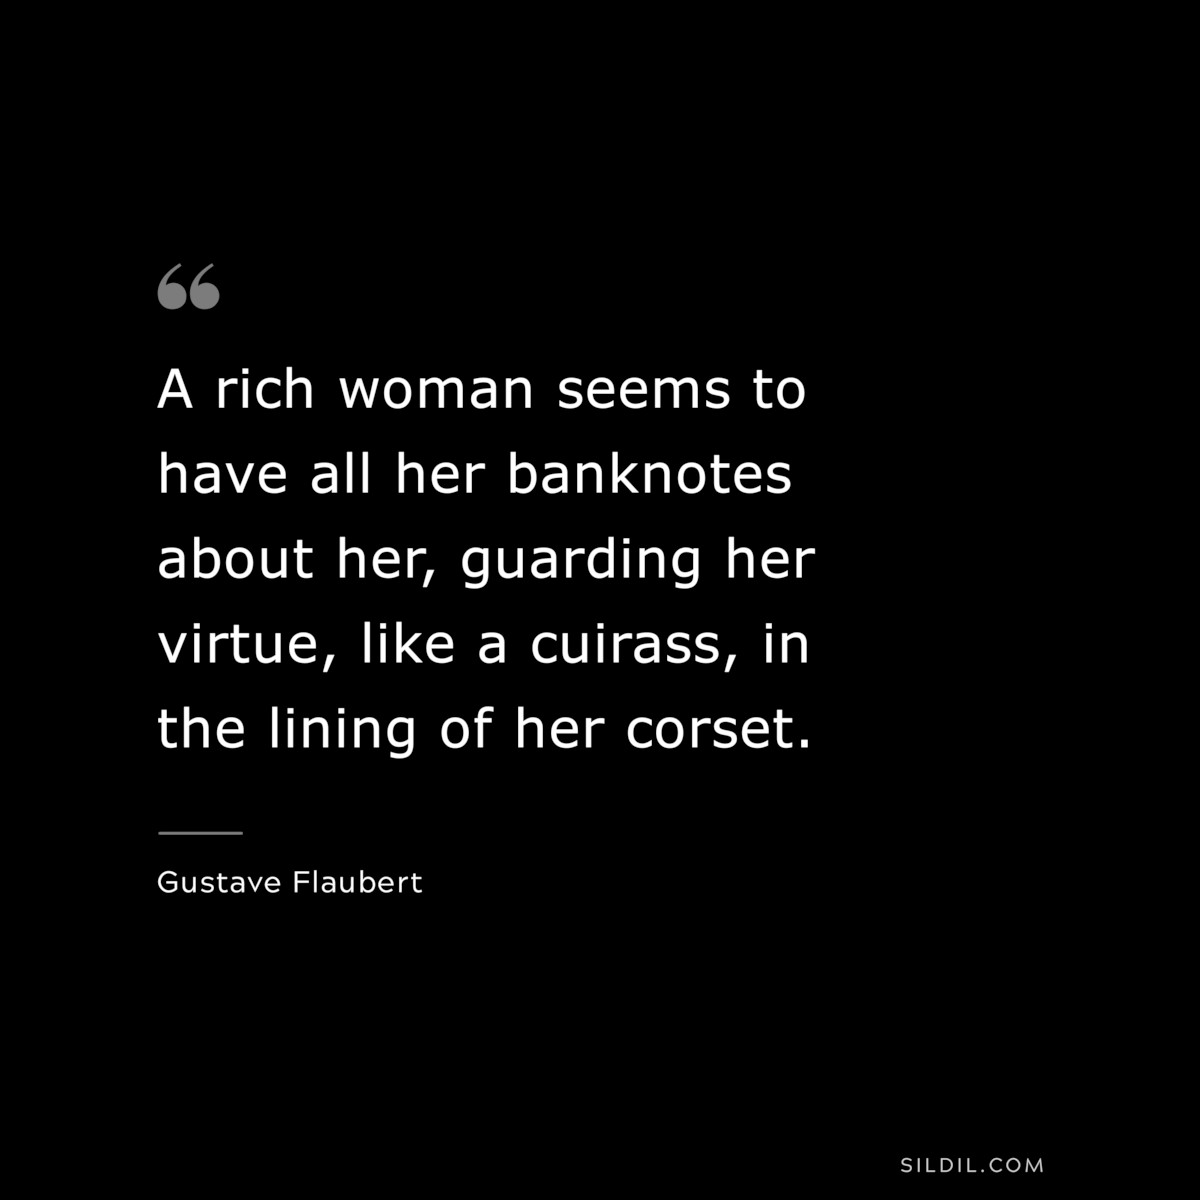 A rich woman seems to have all her banknotes about her, guarding her virtue, like a cuirass, in the lining of her corset. ― Gustave Flaubert